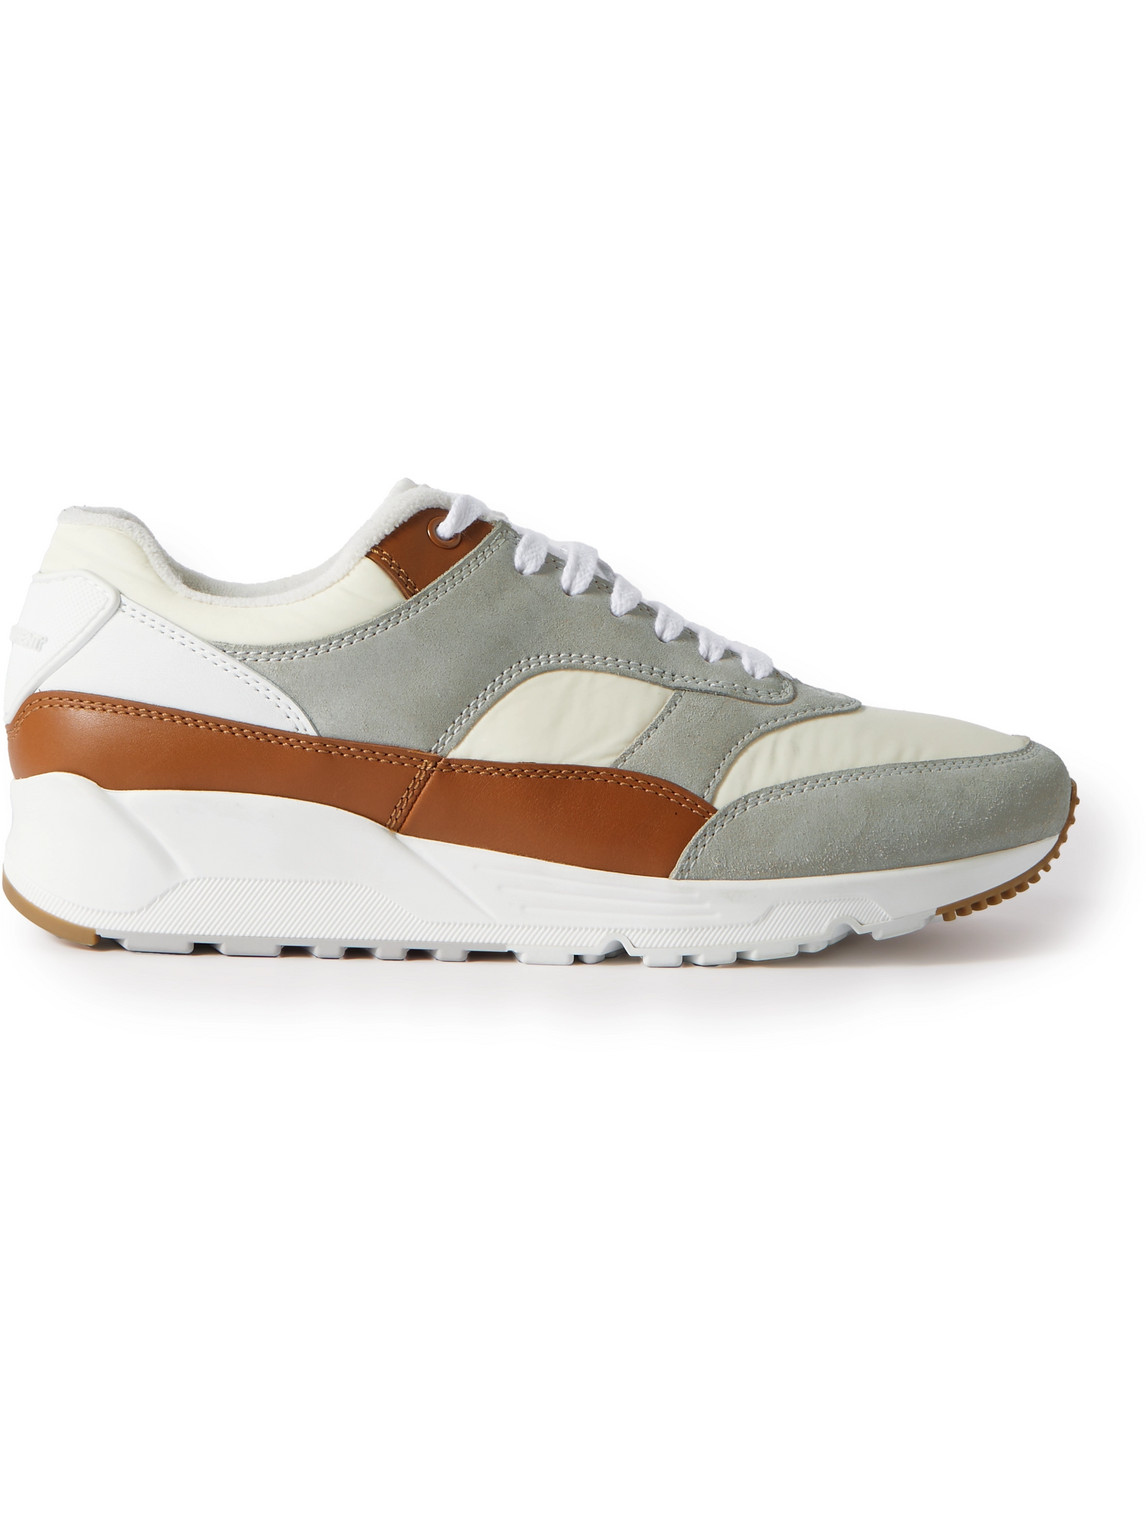 Saint Laurent Bump Colour-block Suede, Shell And Leather Low-top Sneakers In Multicolor